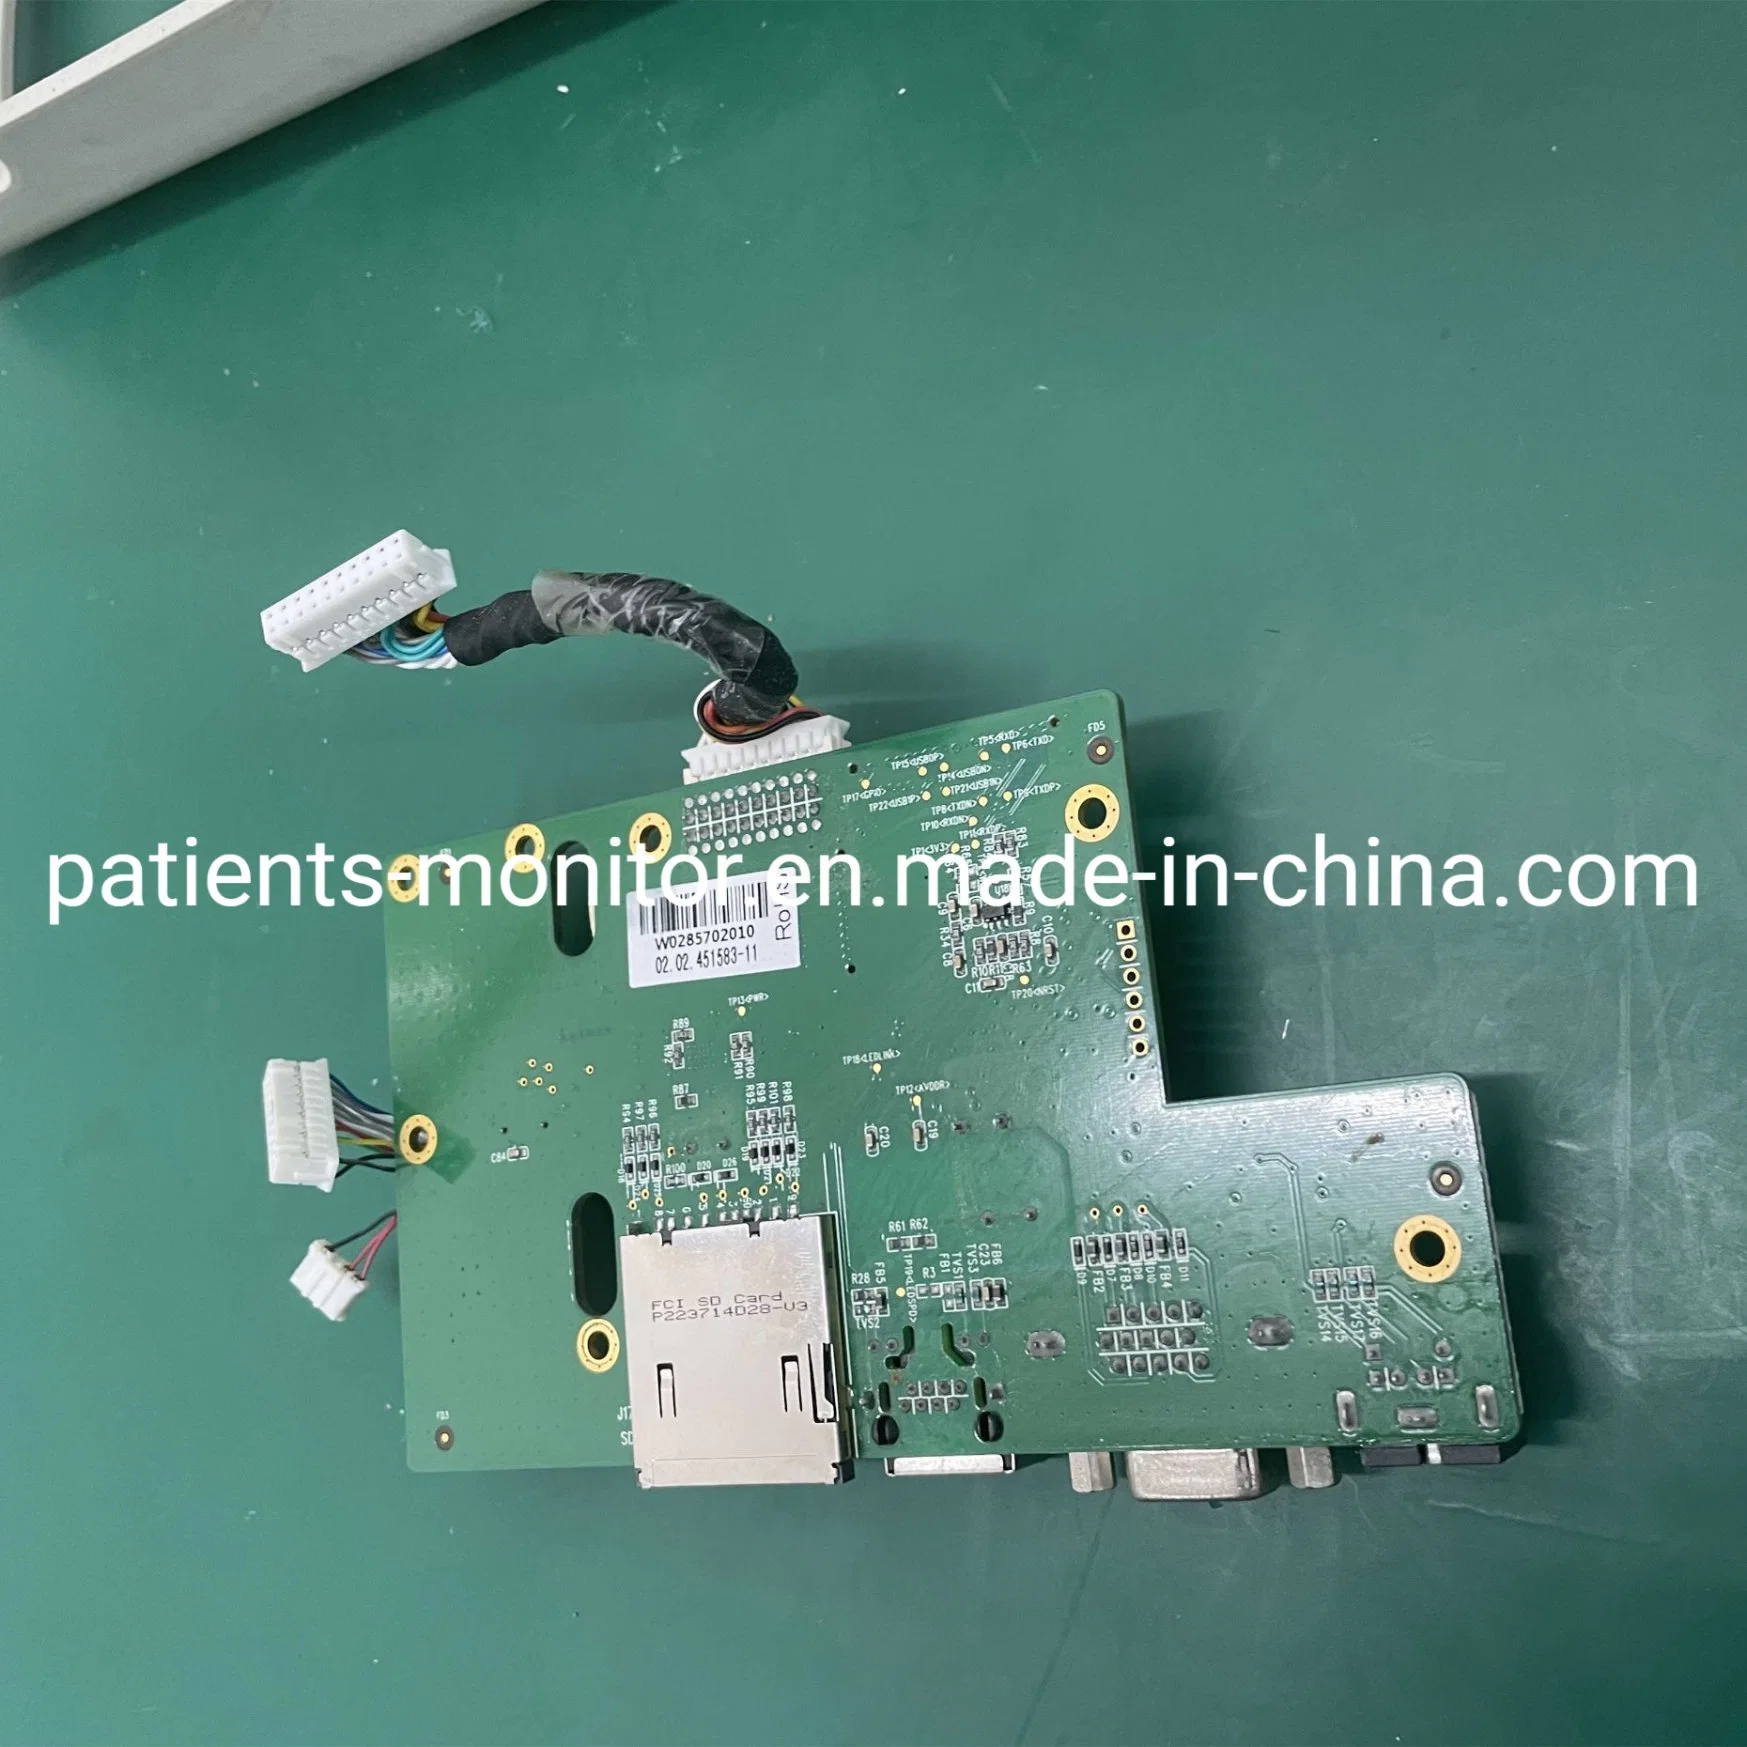 Edan Im60 Patient Monitor Display IP Interface Board 02.02.451583-11 (Network card, Mouse, USB)